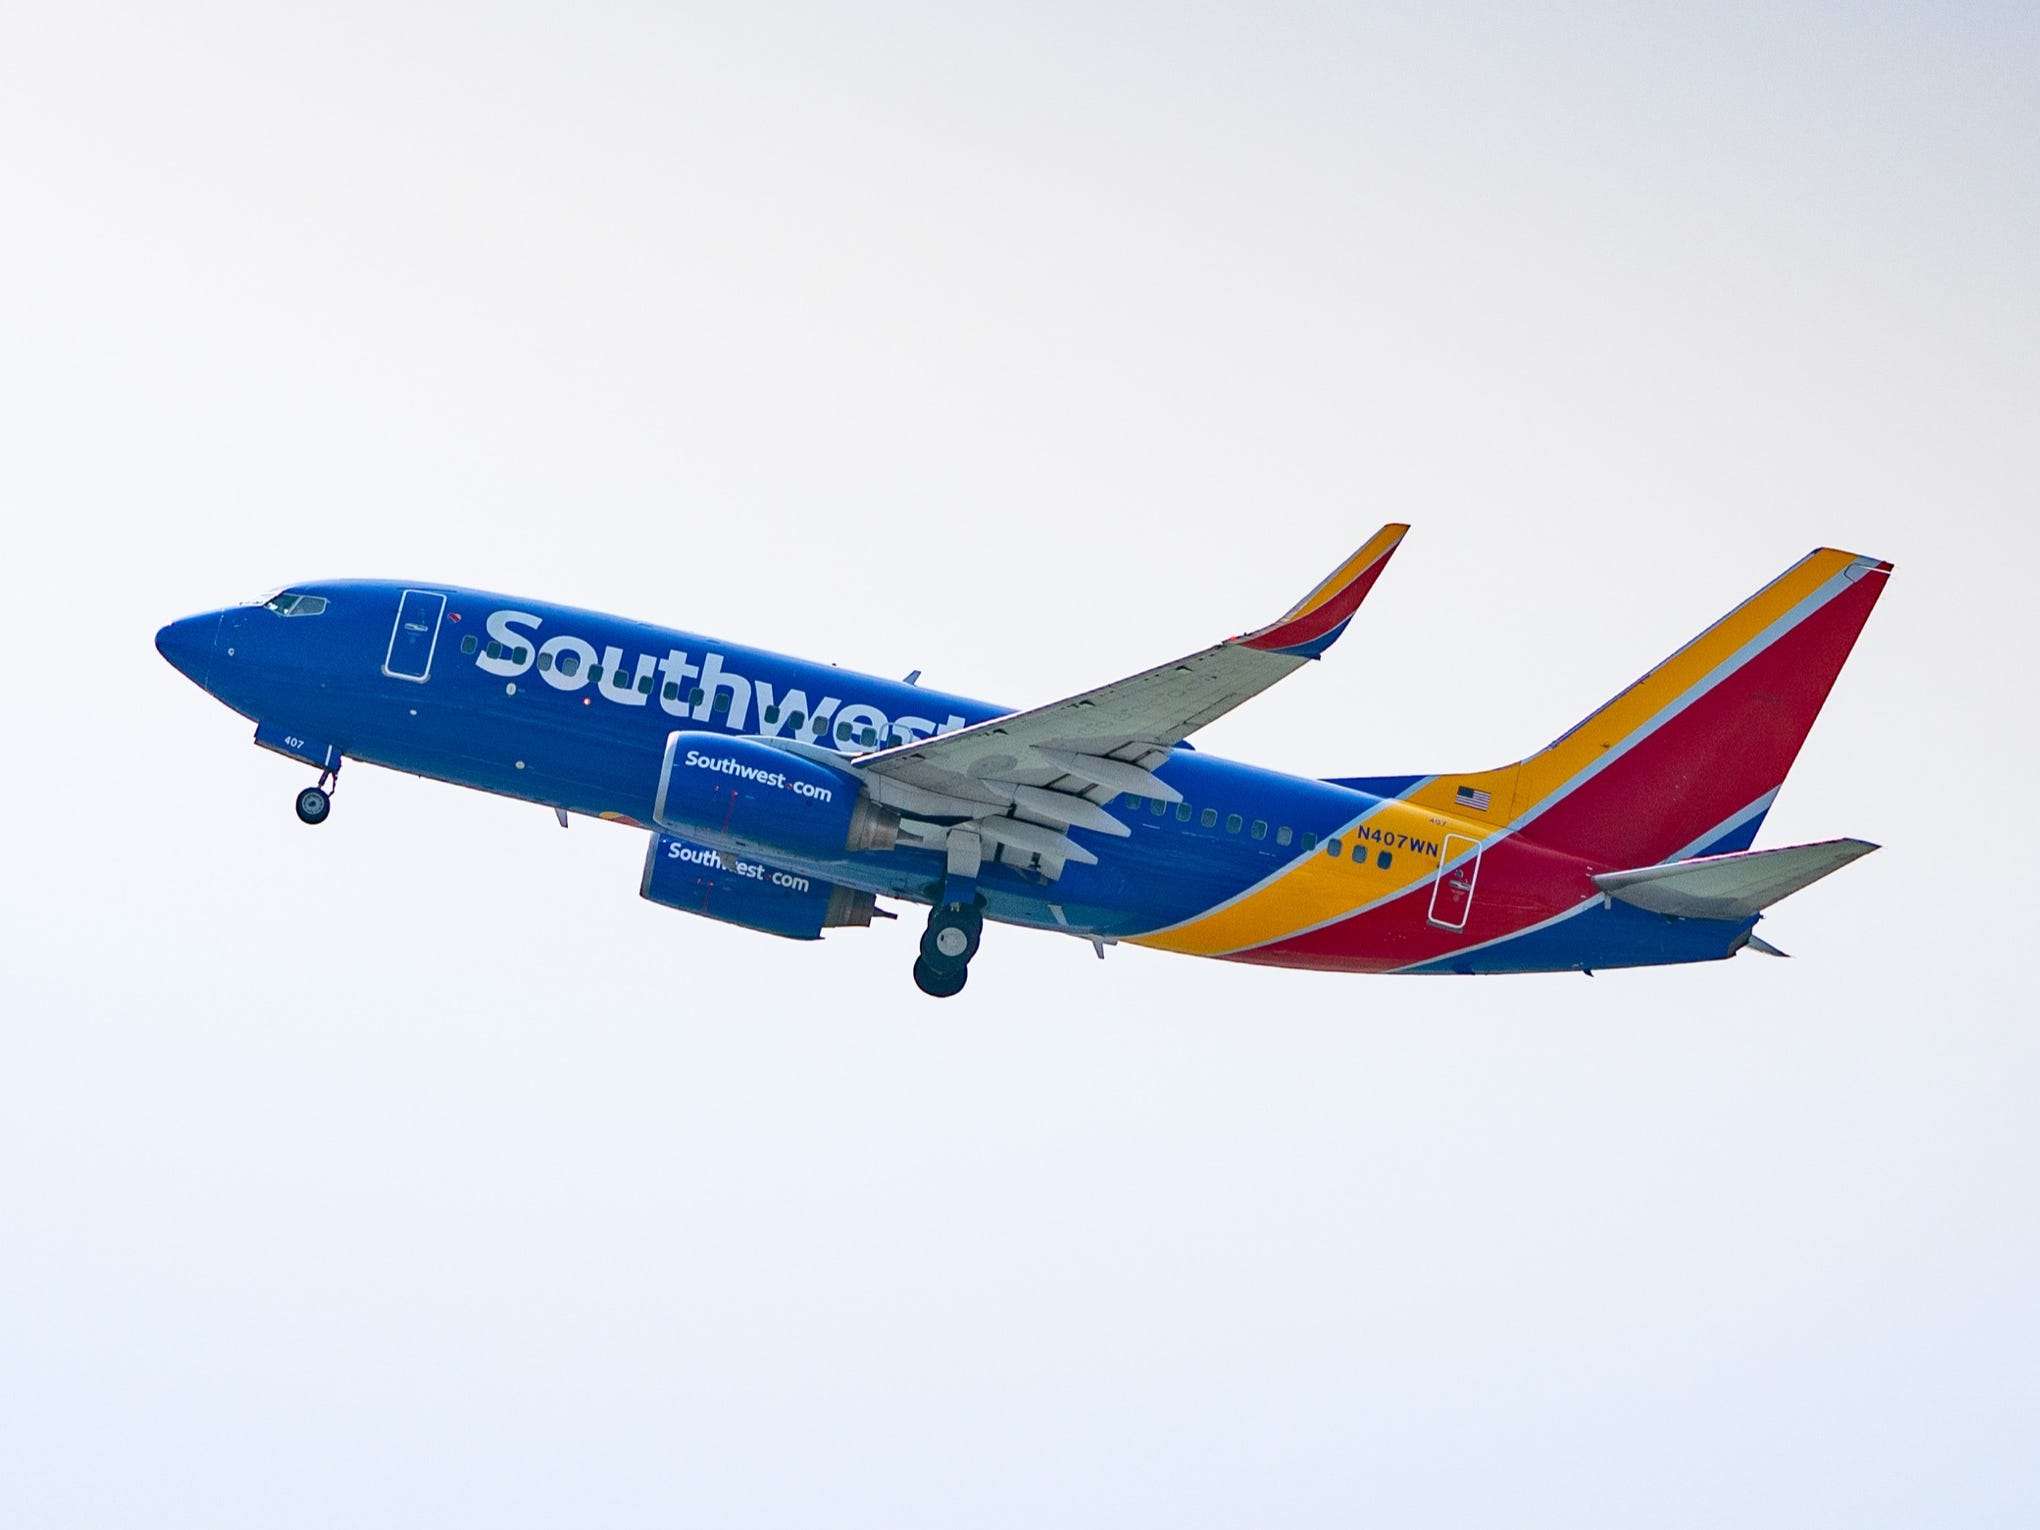 Southwest Airlines just announced 5 new routes to new destinations on